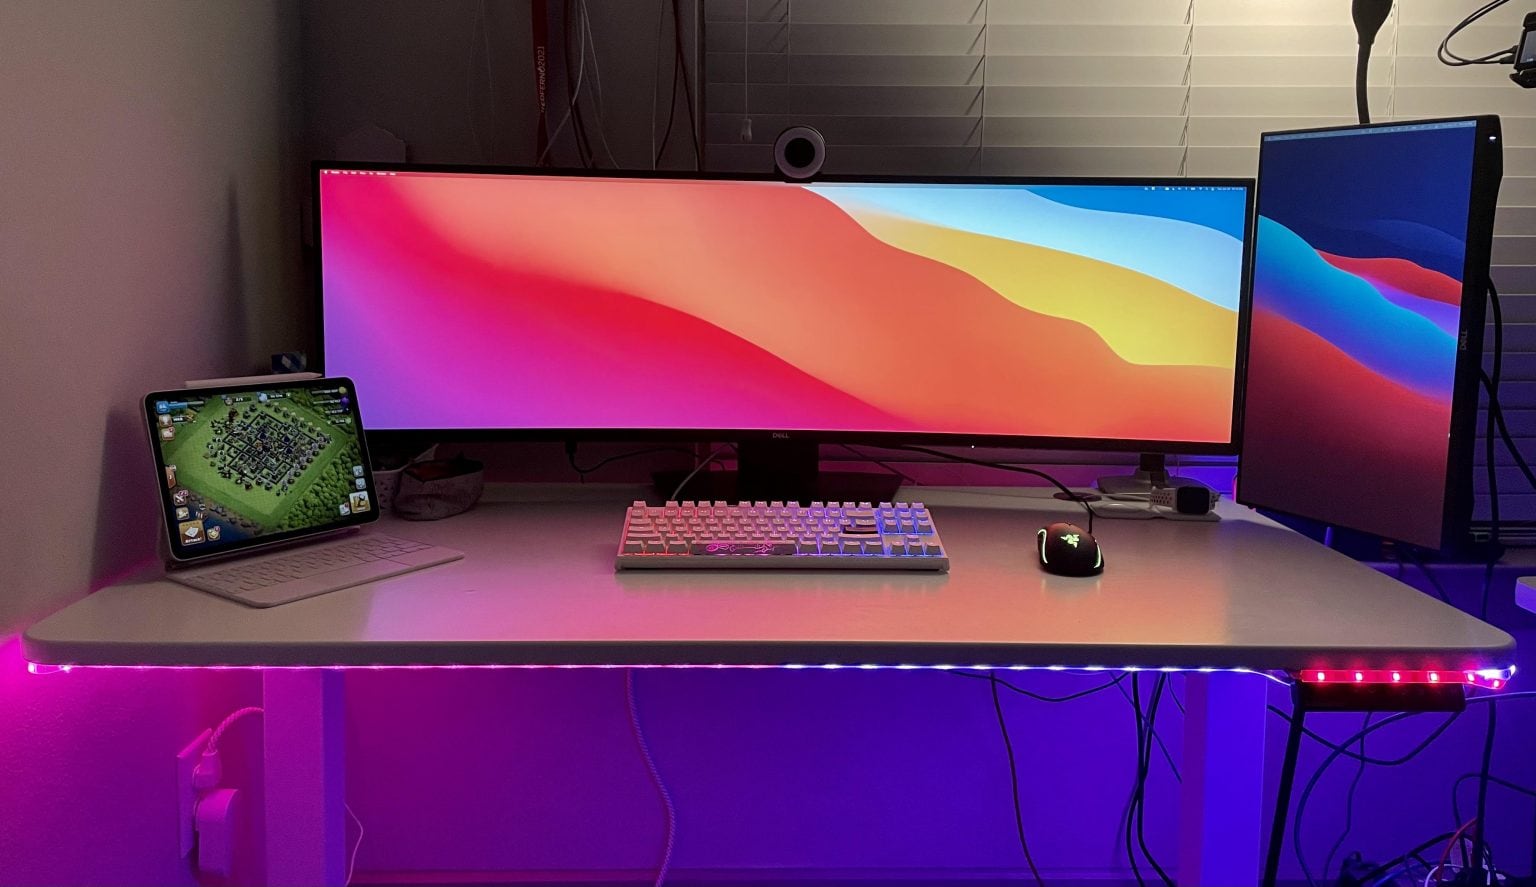 If you would like to see your setup featured on Cult of Mac, send some high-res pictures to info+setups@cultofmac.com. Please provide a detailed list of your equipment. Tell us what you like or dislike about your setup, and fill us in on any special touches or challenges.